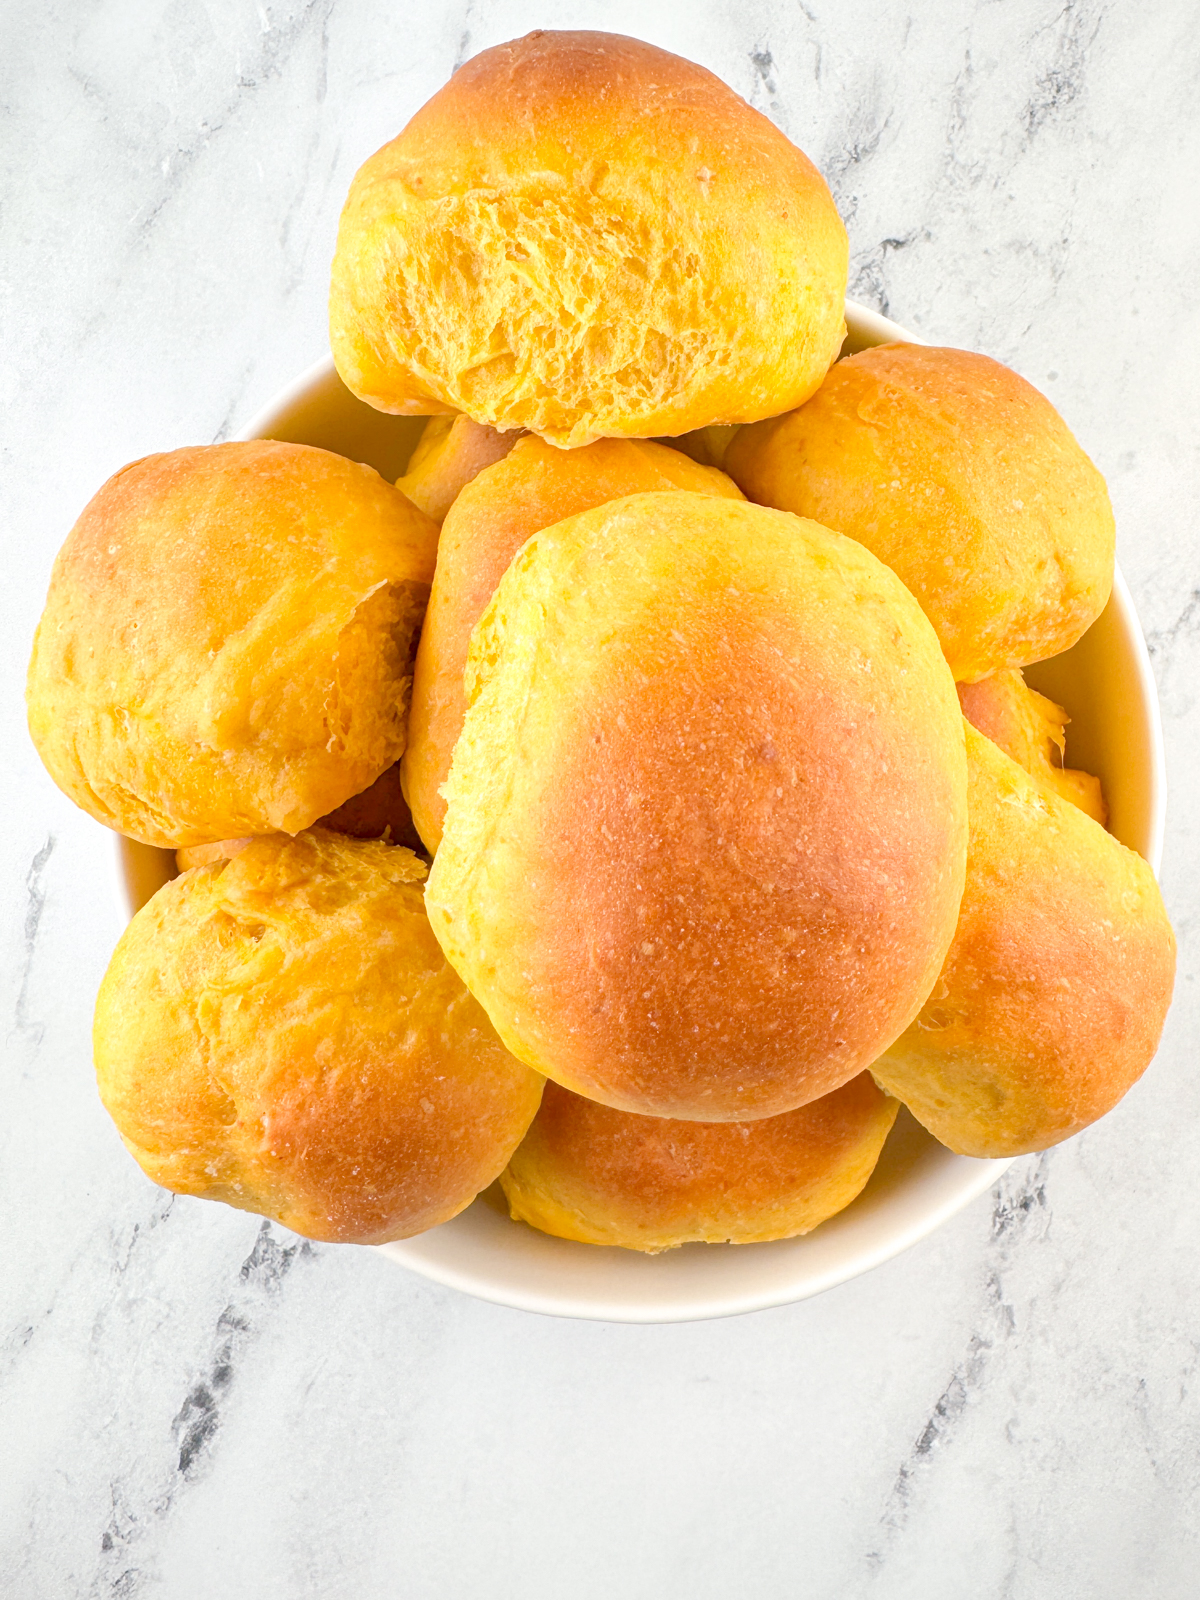 Baked pumpkin yeast rolls piled up in a white bowl.